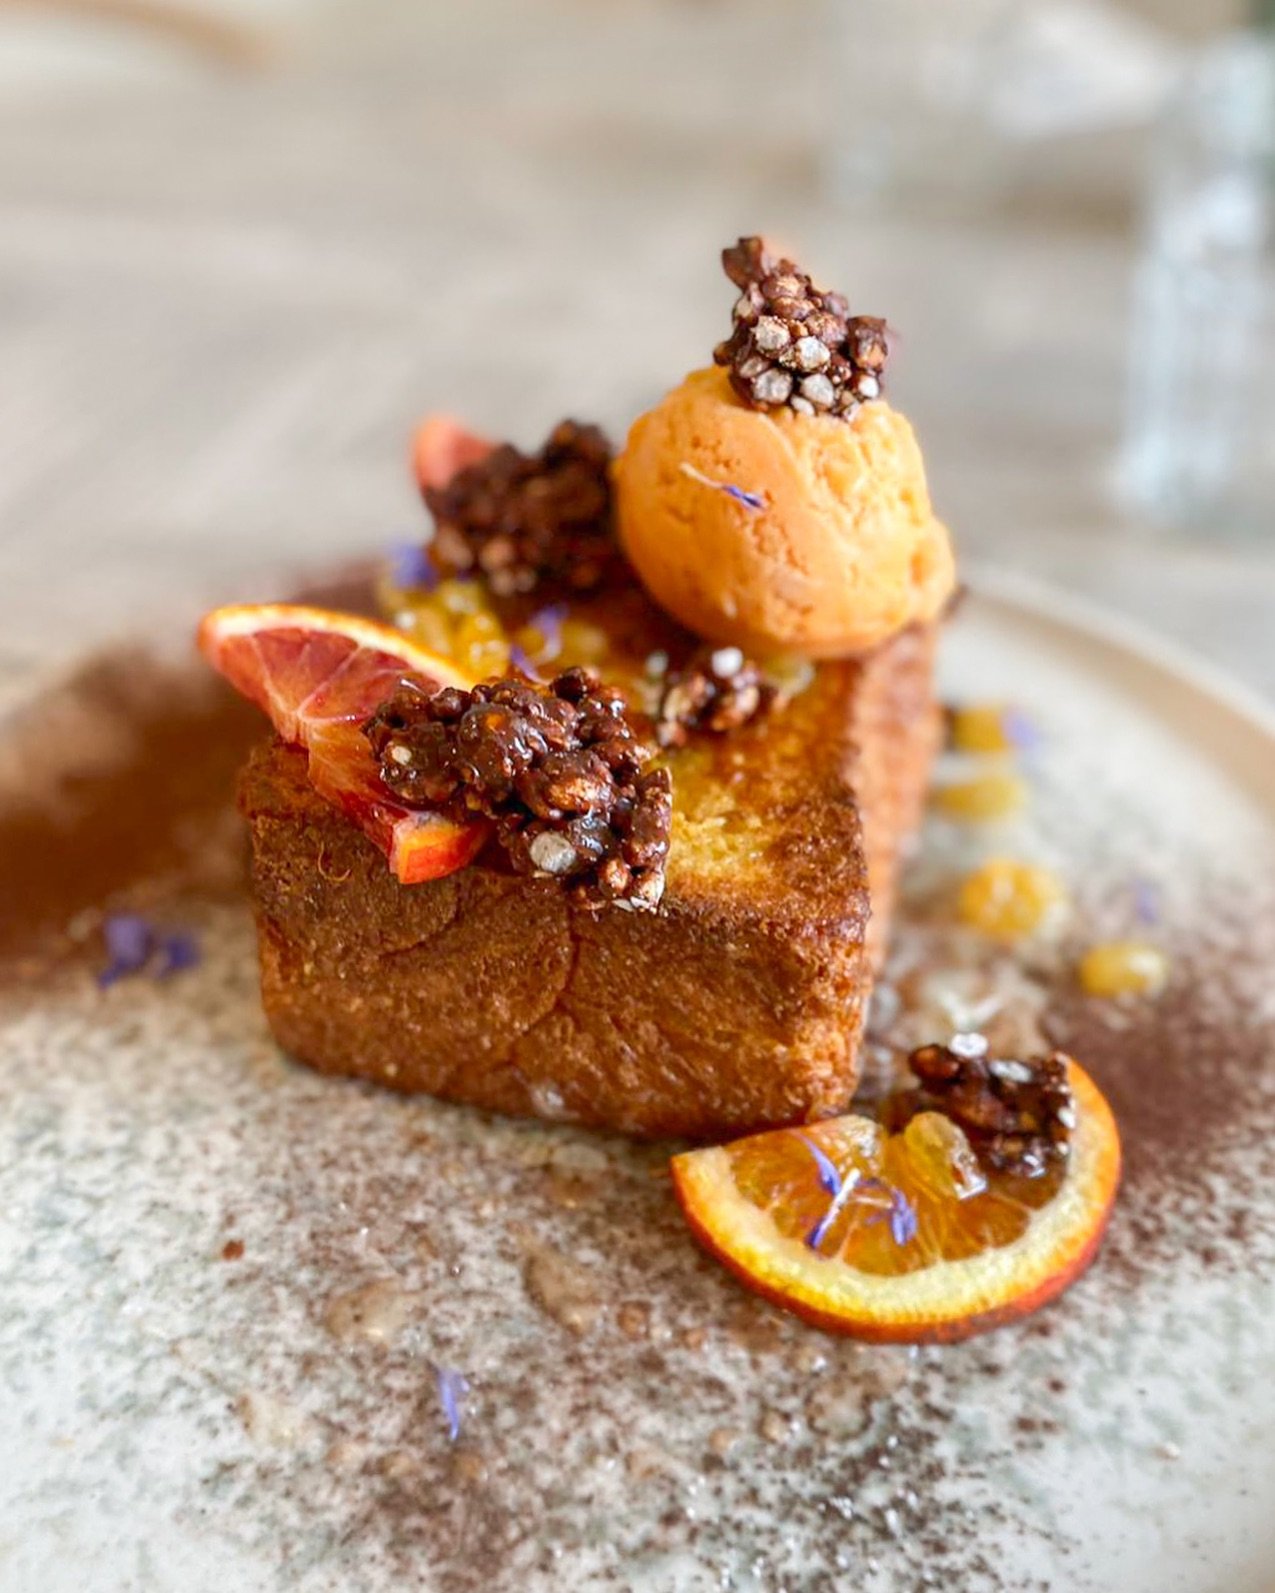 This week&rsquo;s special French toast in Brigg is White chocolate &amp; Rosemary Ganache, Hazelnut &amp; Candied orange Rice Crispy cake, Golden Sultana in Peach tea syrup, Blood Orange Sorbet 🍊